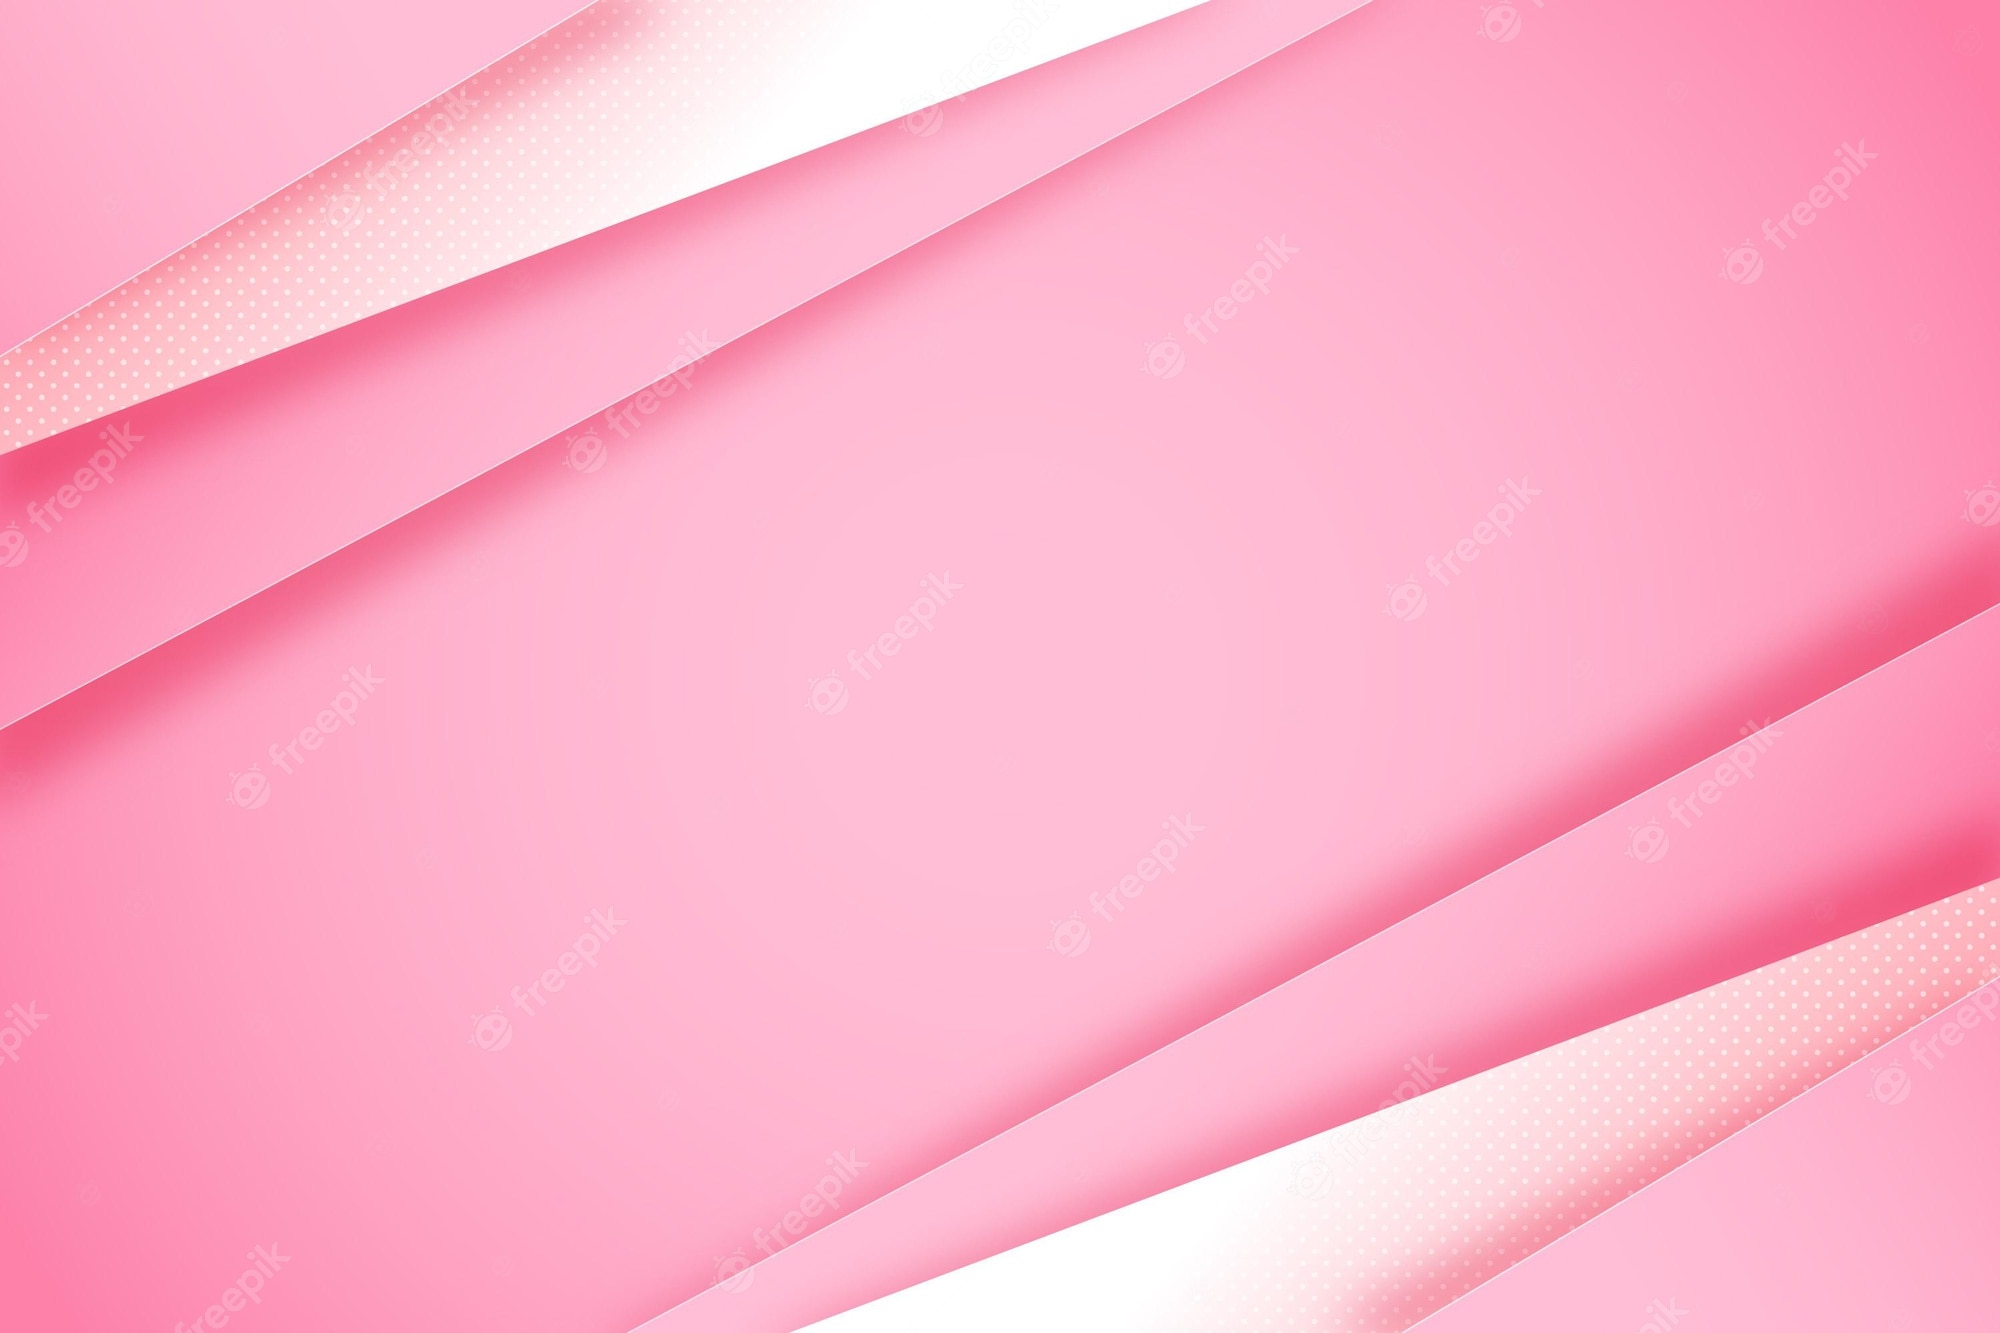 A pink abstract background with overlapping lines - Soft pink